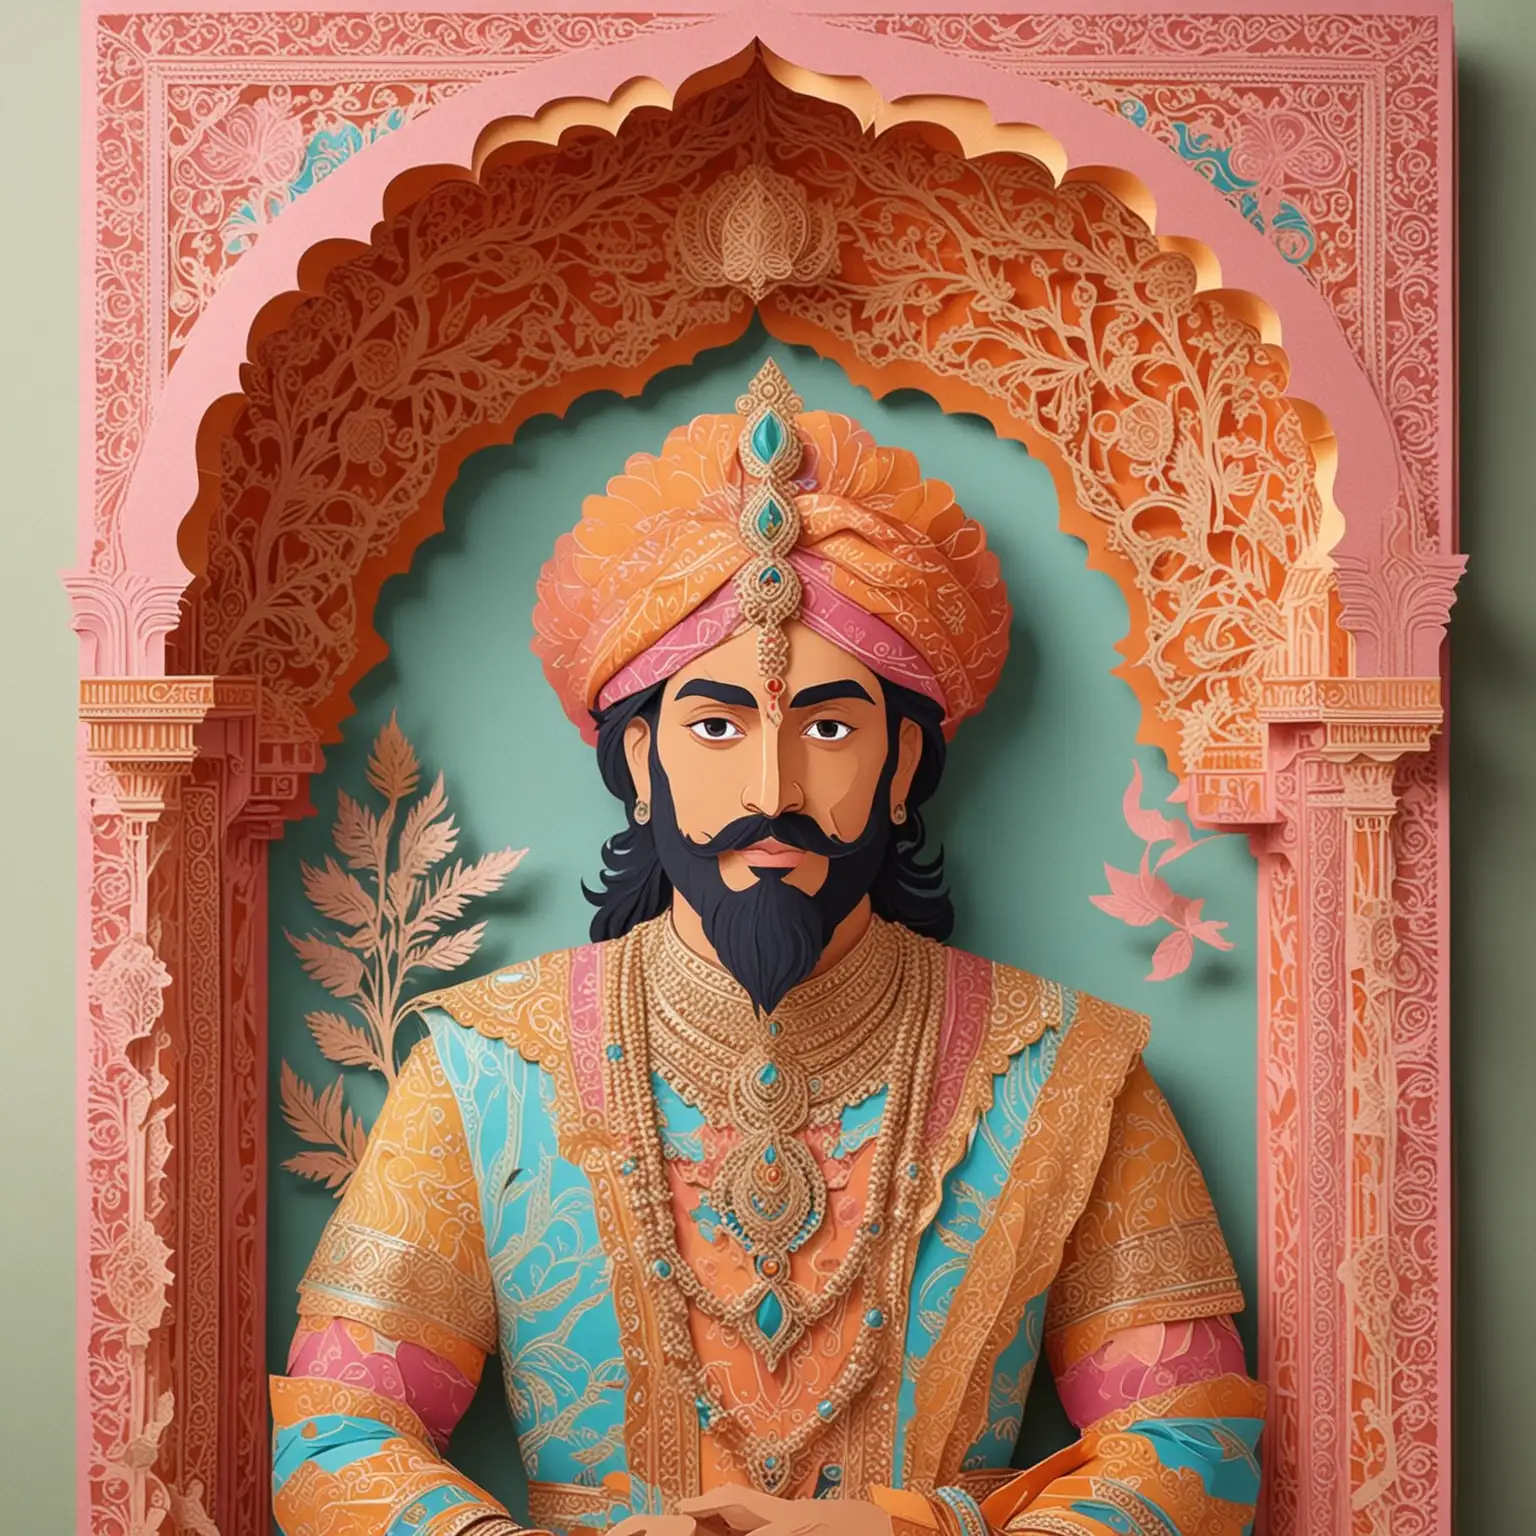 Colorful Paper Portrait of a Maharaja Warrior in Indian Castle Interior